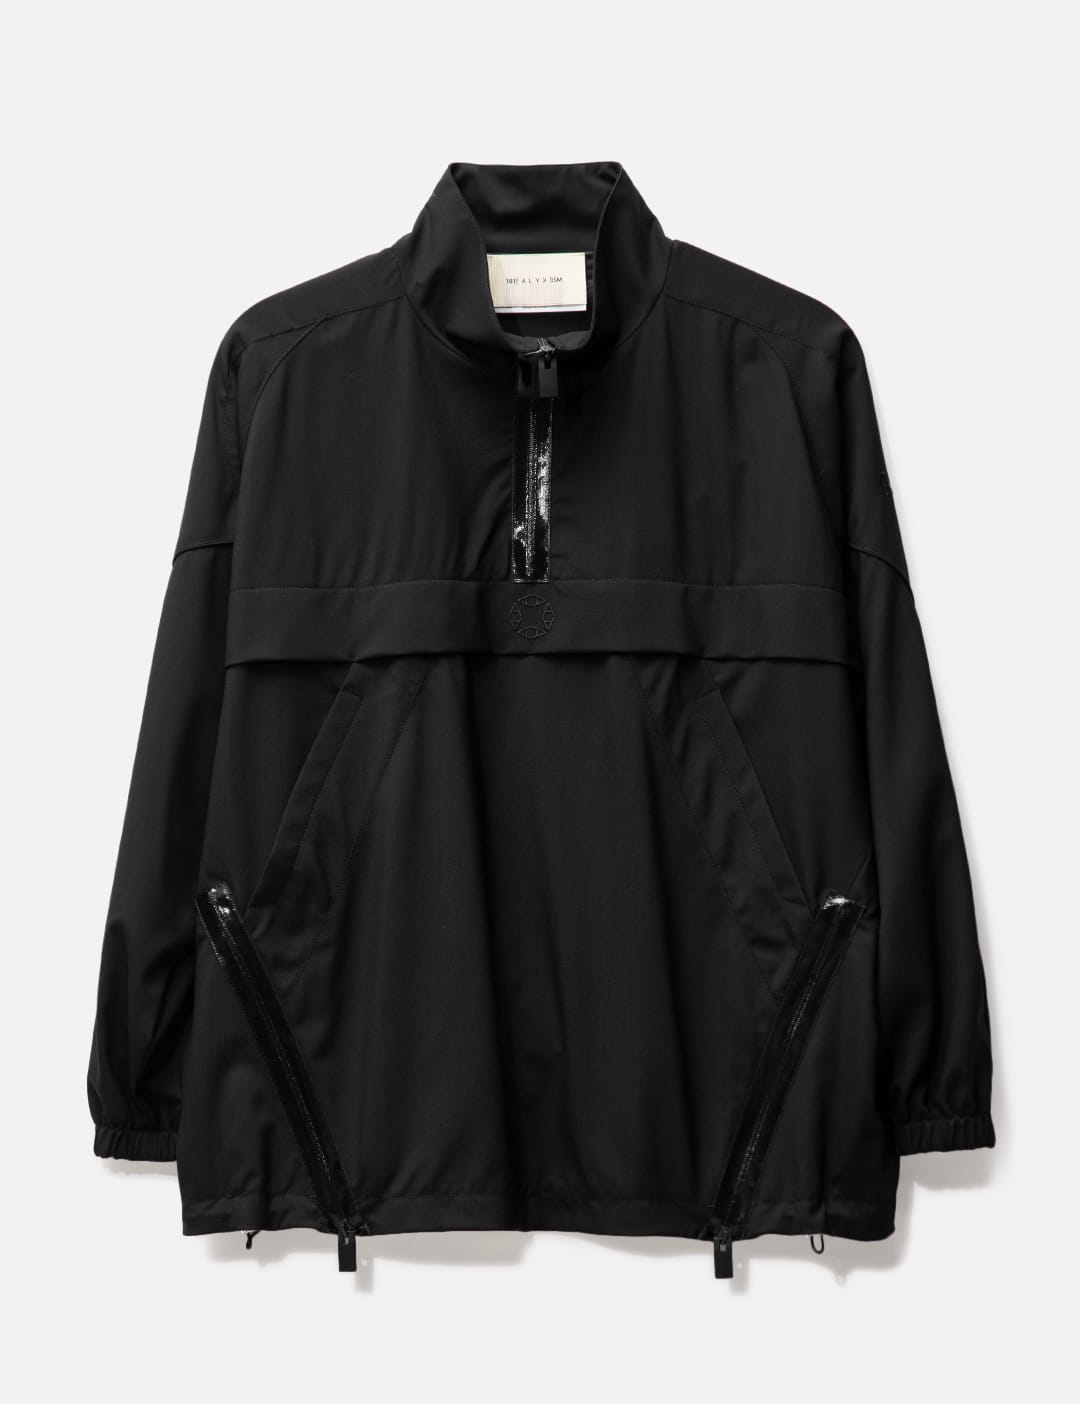 1017 ALYX 9SM - TAILORING SAIL PULLOVER JACKET | HBX - Globally